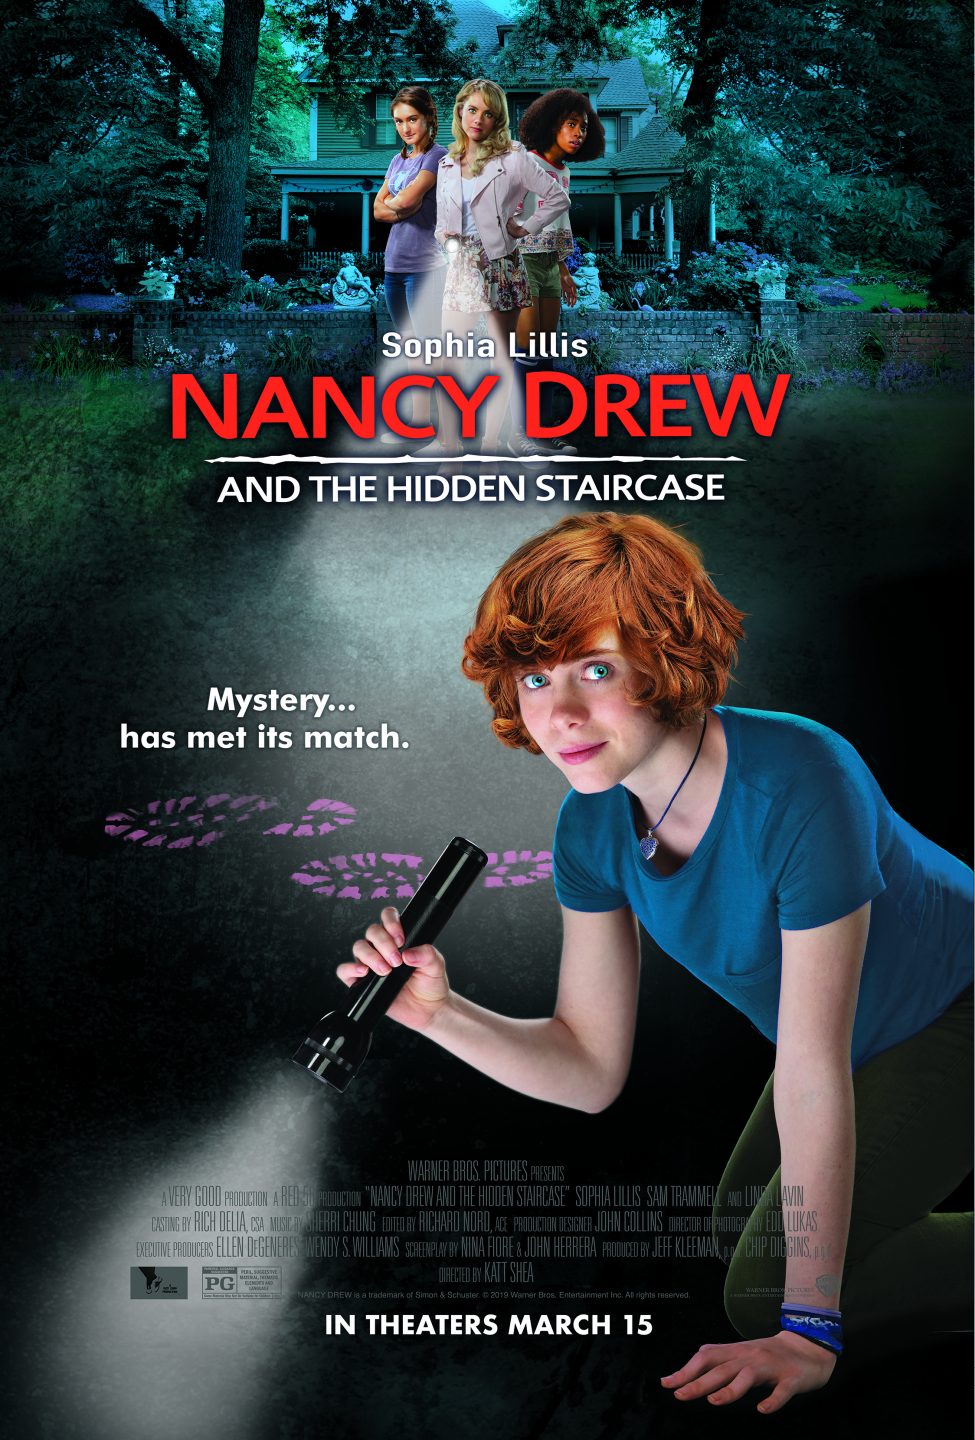 Nancy Drew And The Hidden Staircase Blu-Ray Combo Pack cover (Warner Bros. Home Entertainment)